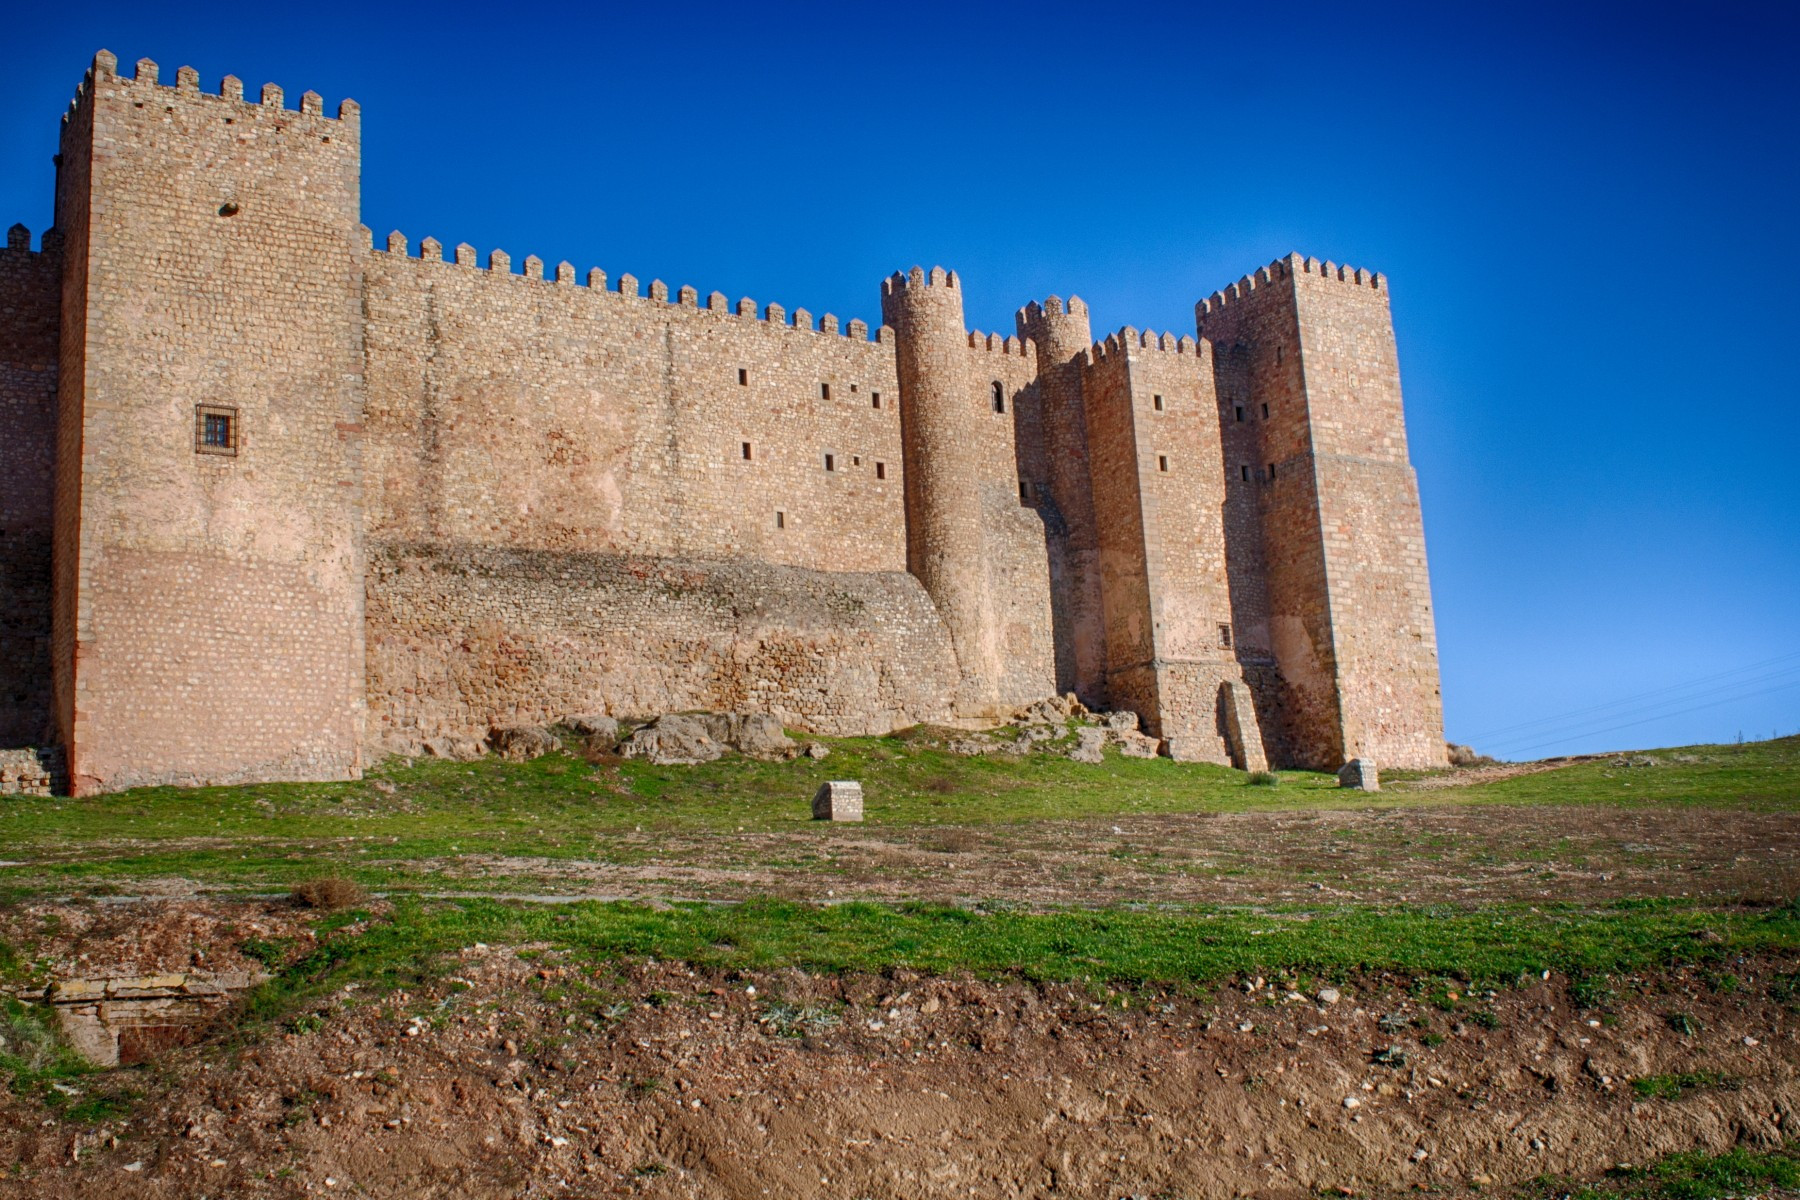 Автор: M.Peinado - Flickr: 007089 - Sigüenza, CC BY 2.0, https://commons.wikimedia.org/w/index.php?curid=23681162